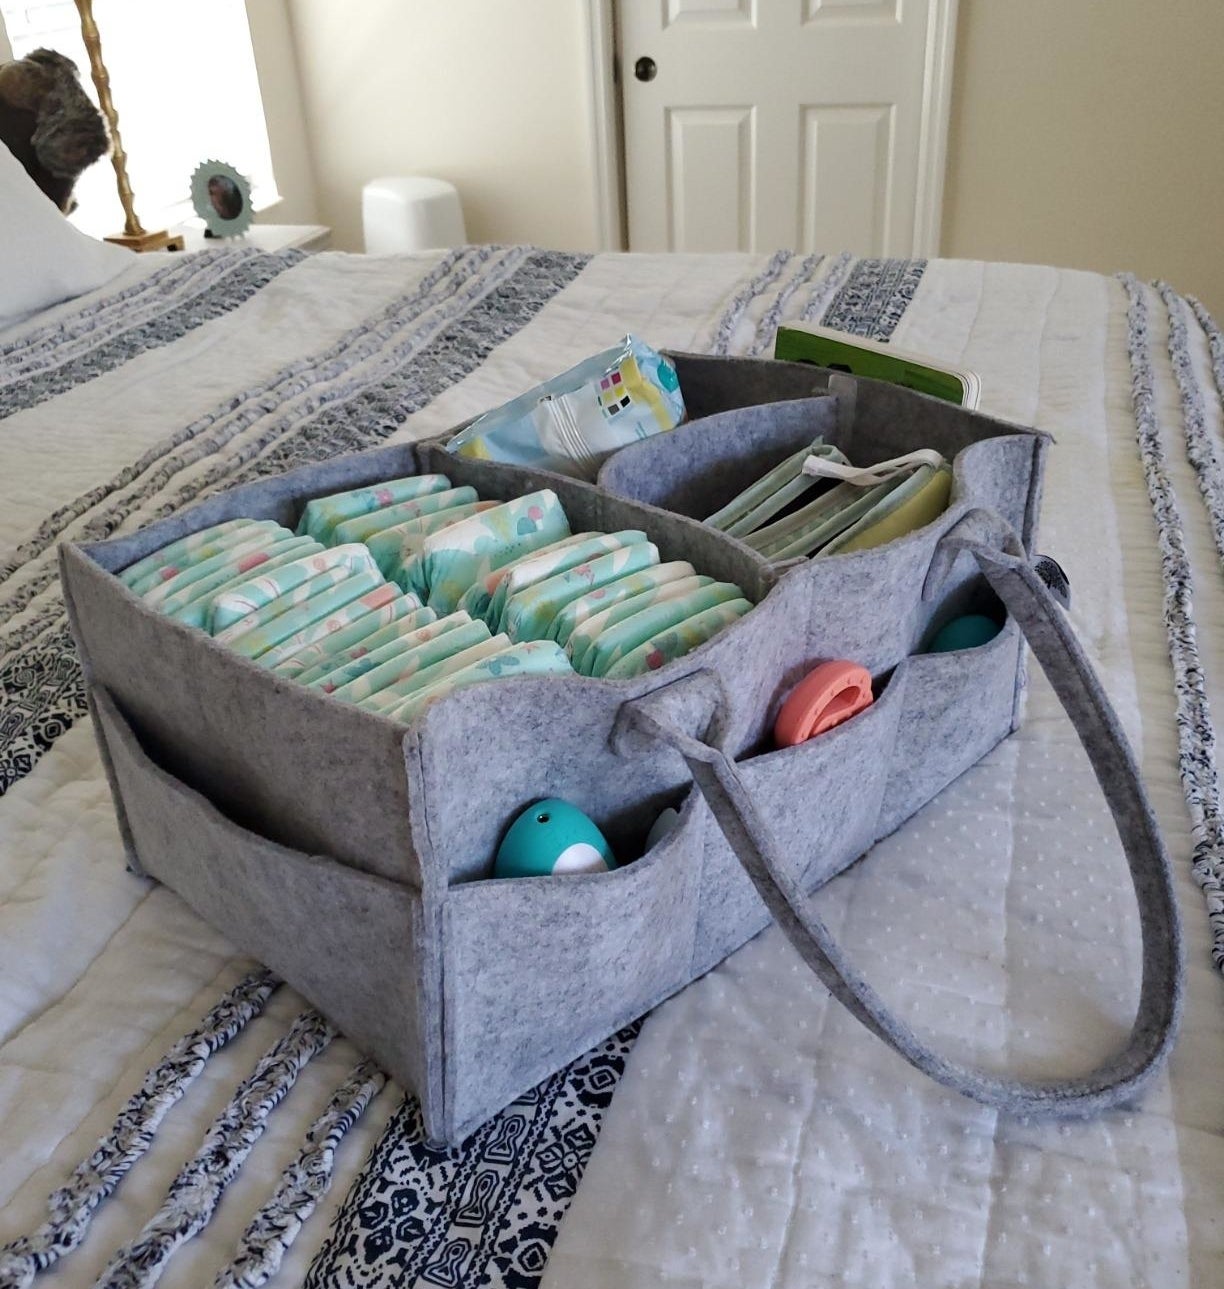 Foldable diaper caddy organizer with compartments, stocked with baby supplies on a bed